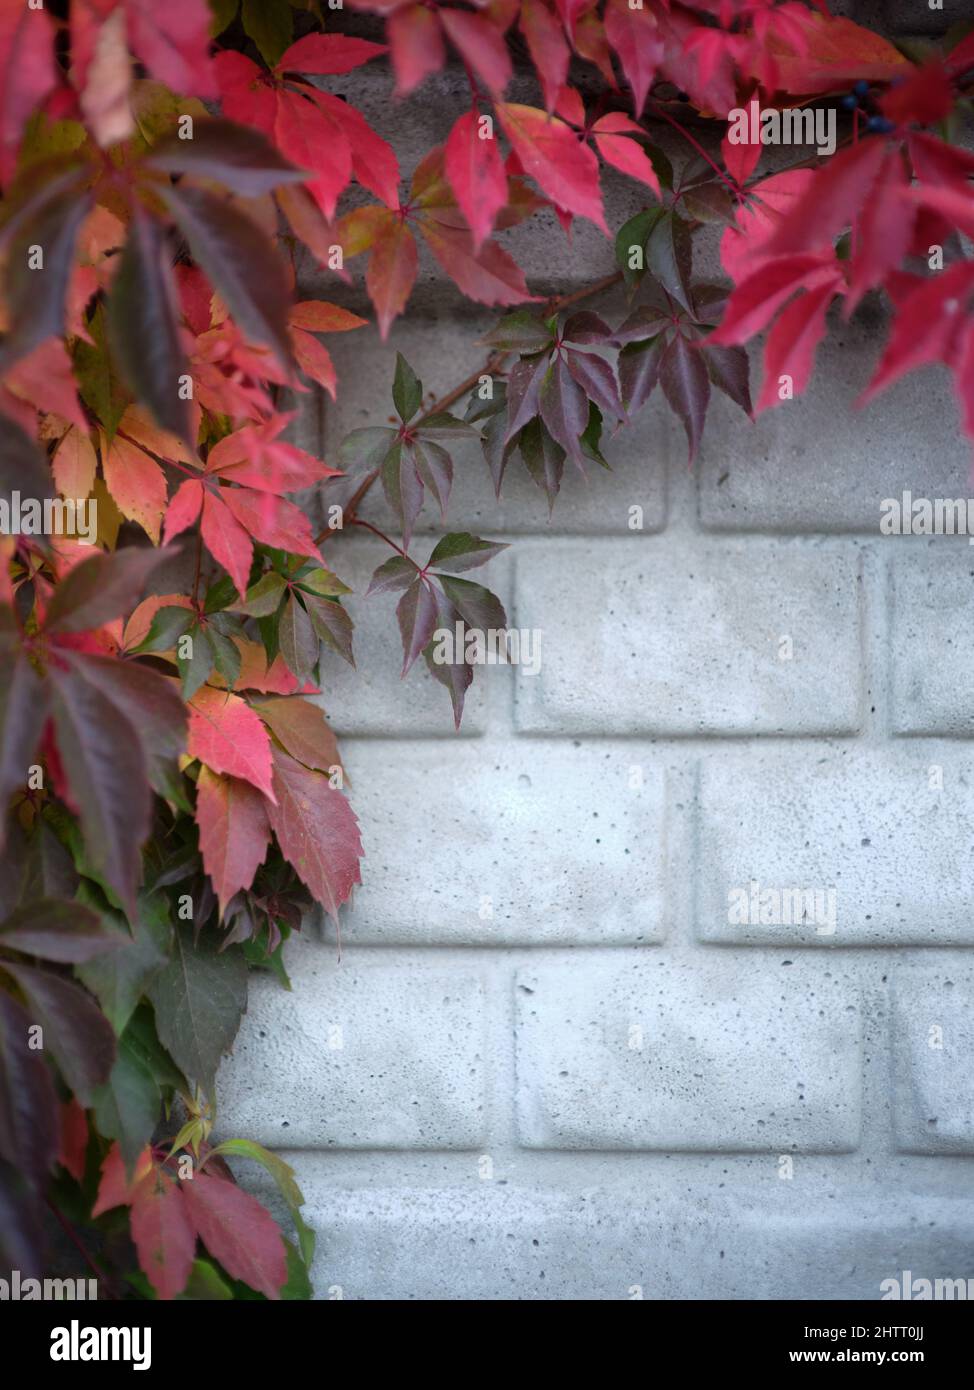 Vertical photo of leaves hanging from a climbing plant on a wall Stock Photo